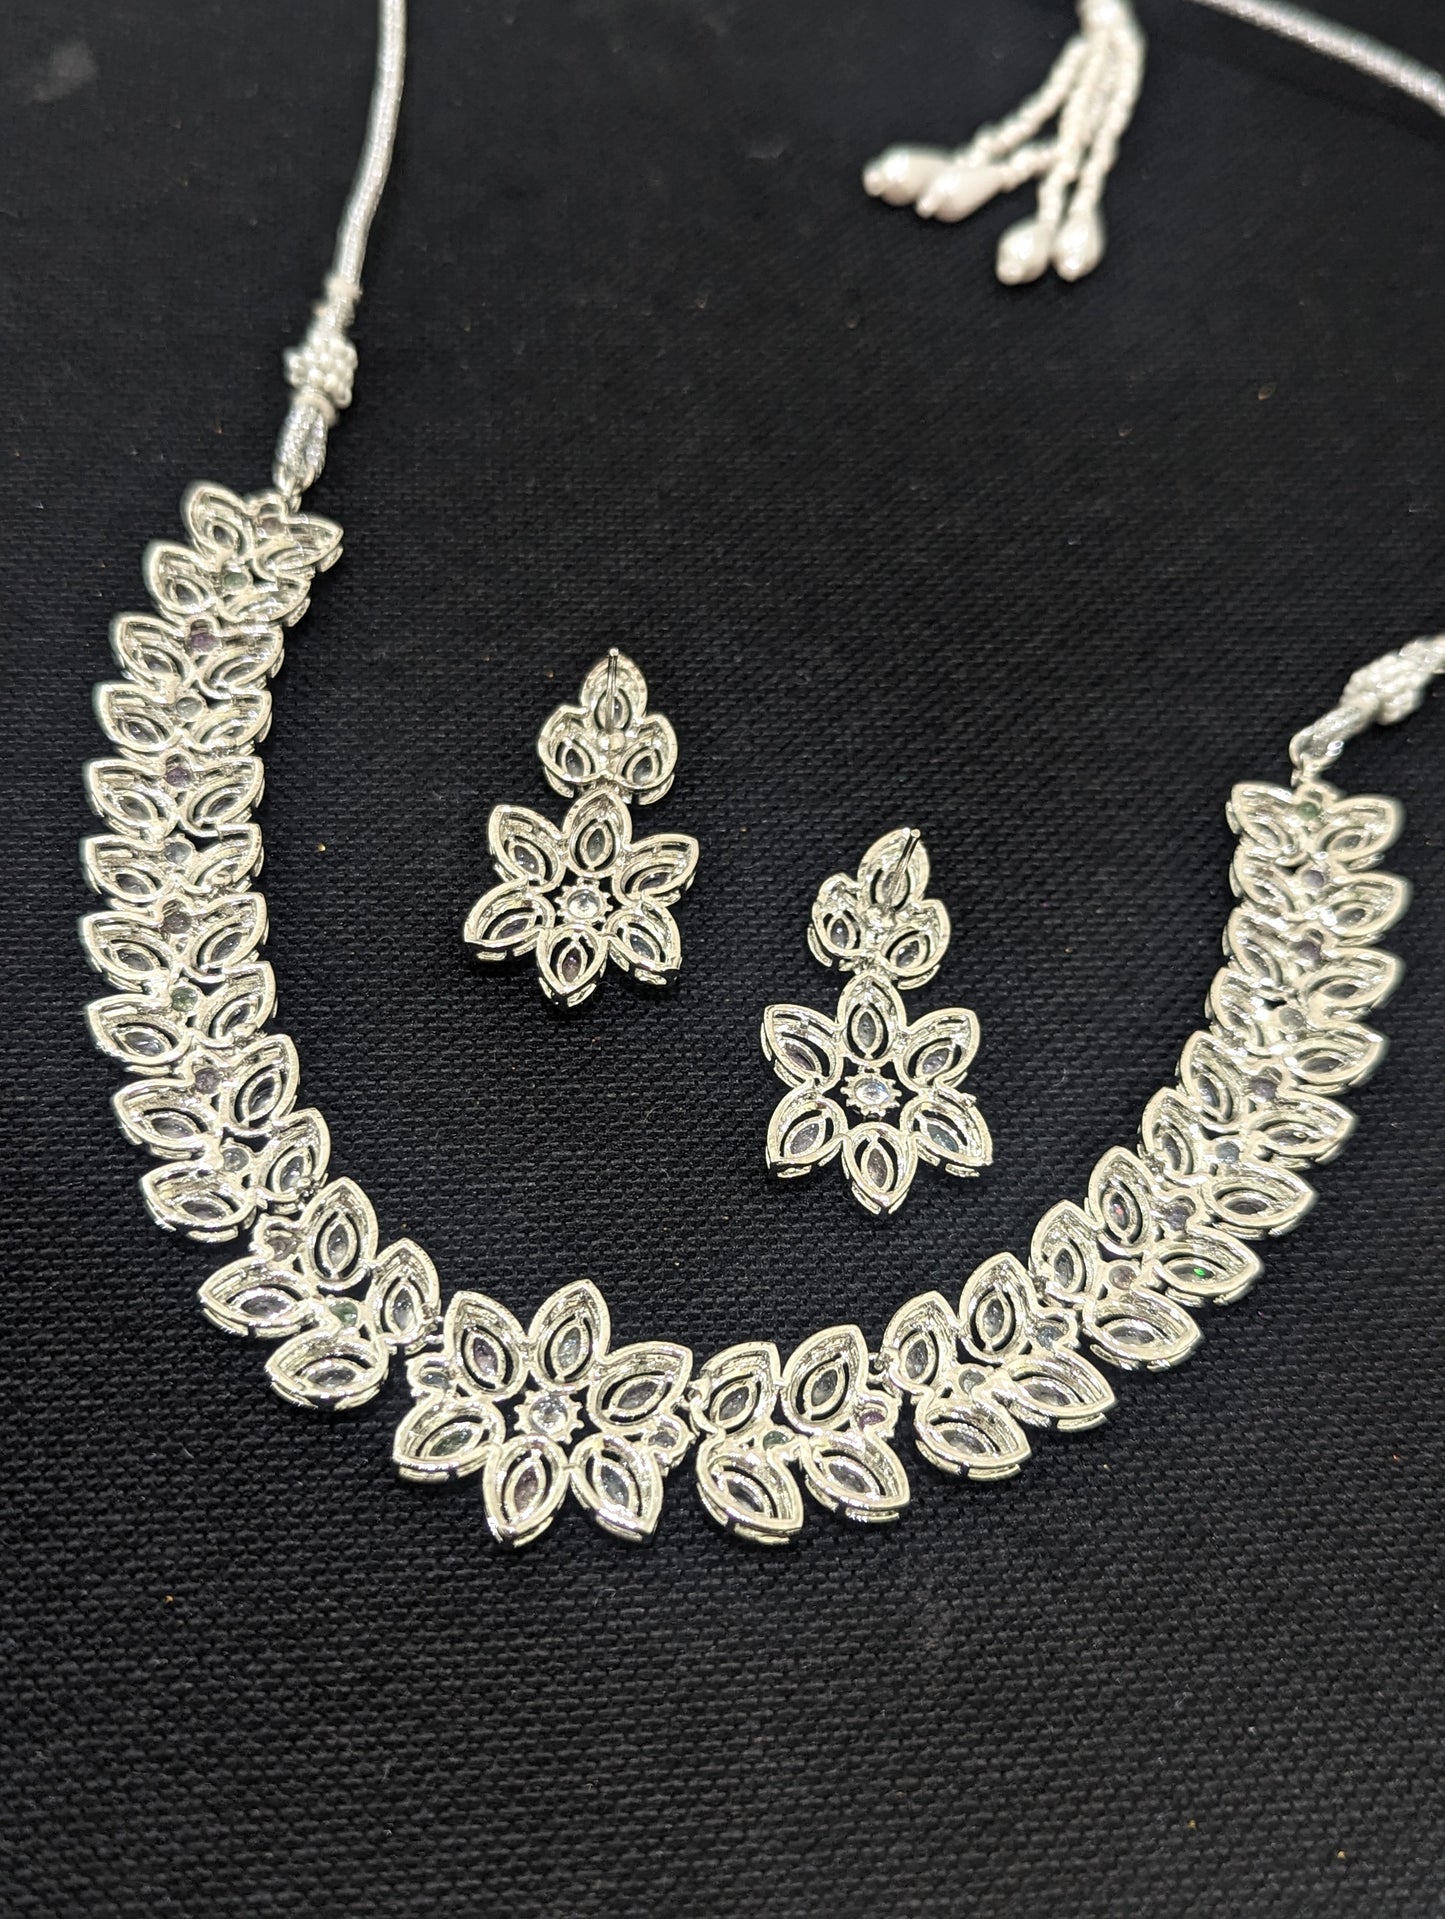 Bright Silver CZ necklace and earrings set